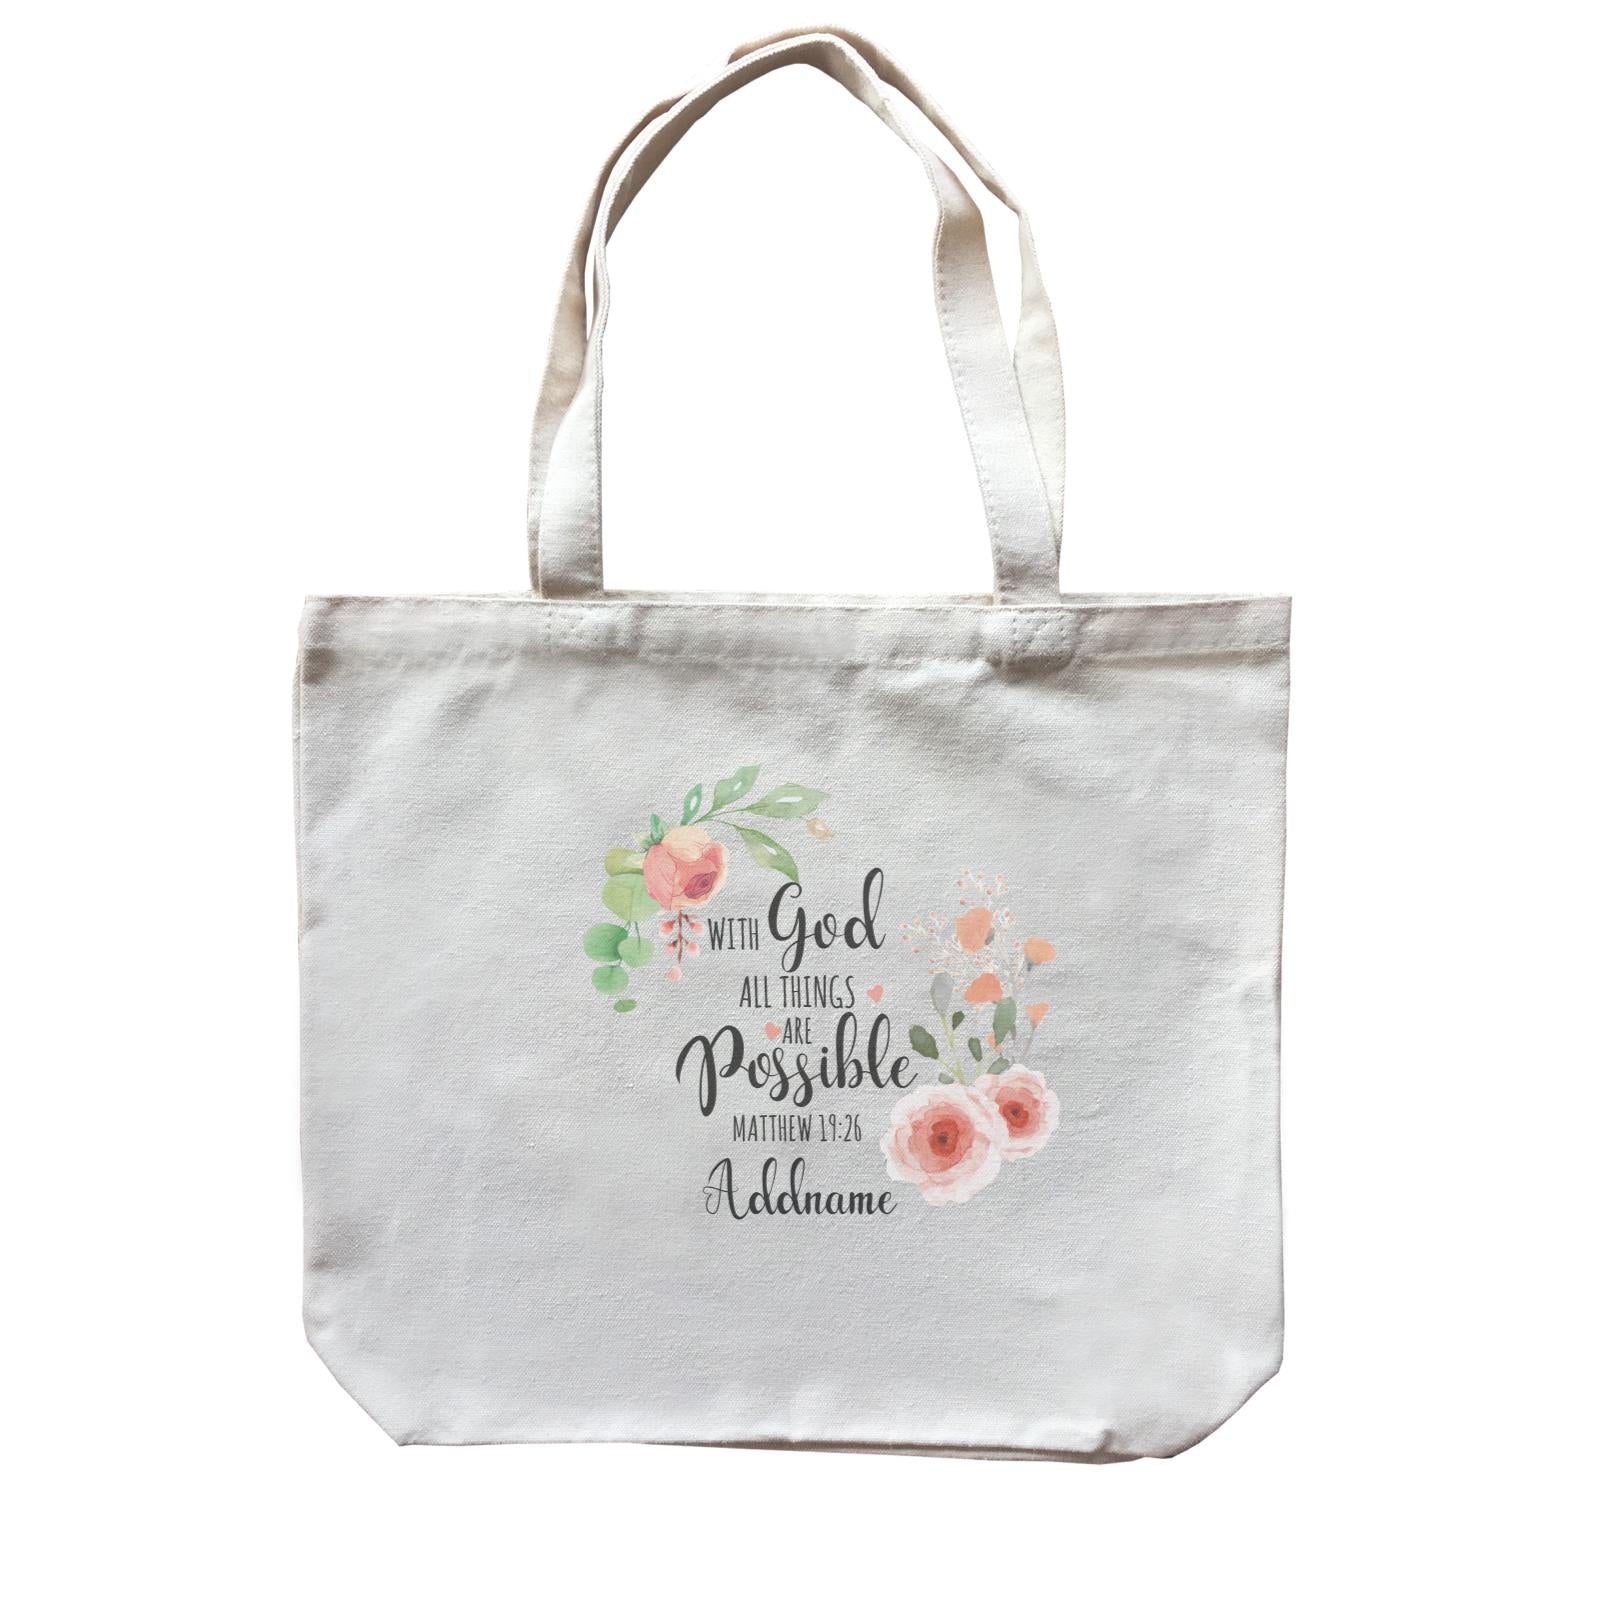 Gods Gift With God All Things Are Possible Matthew 19.26 Addname Canvas Bag